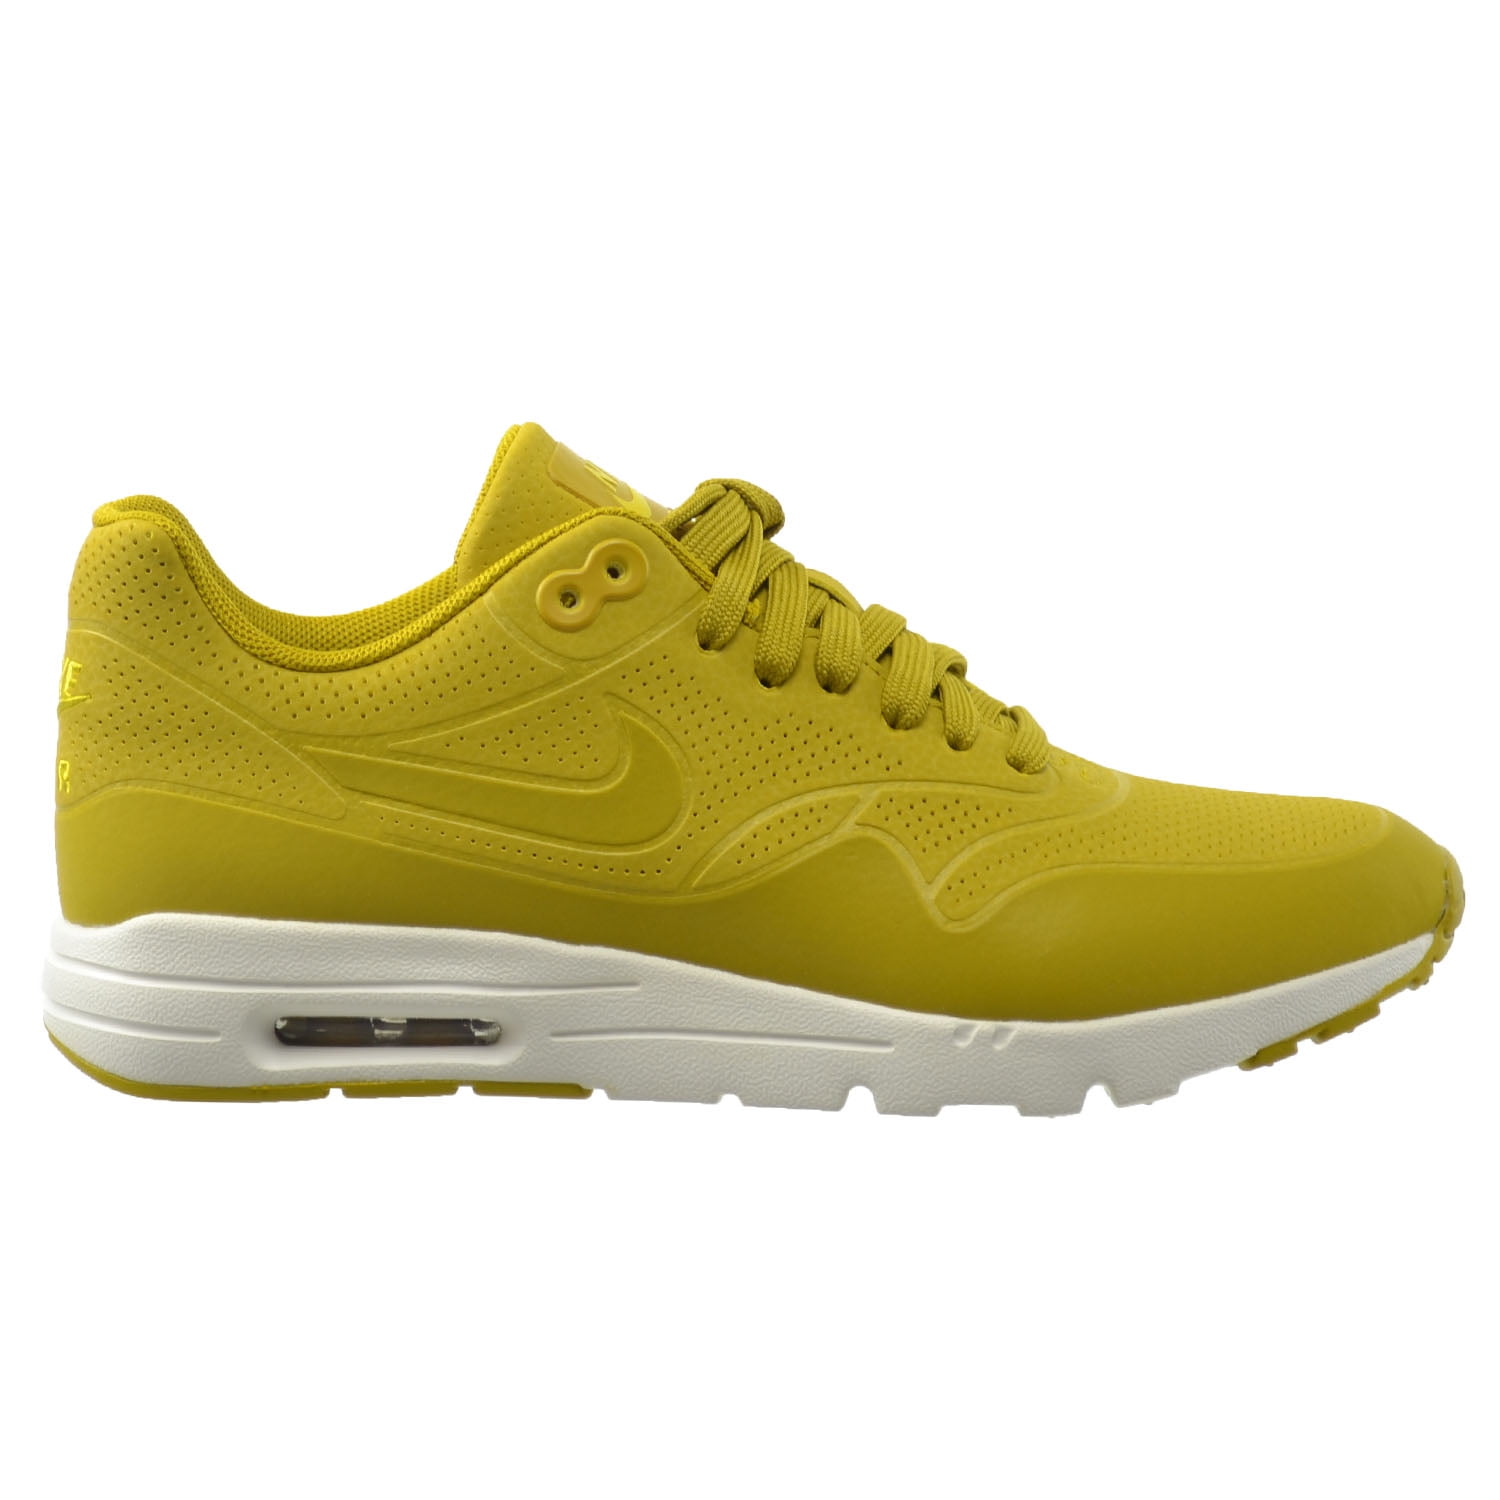 womens nike air max 1 ultra moire running shoes